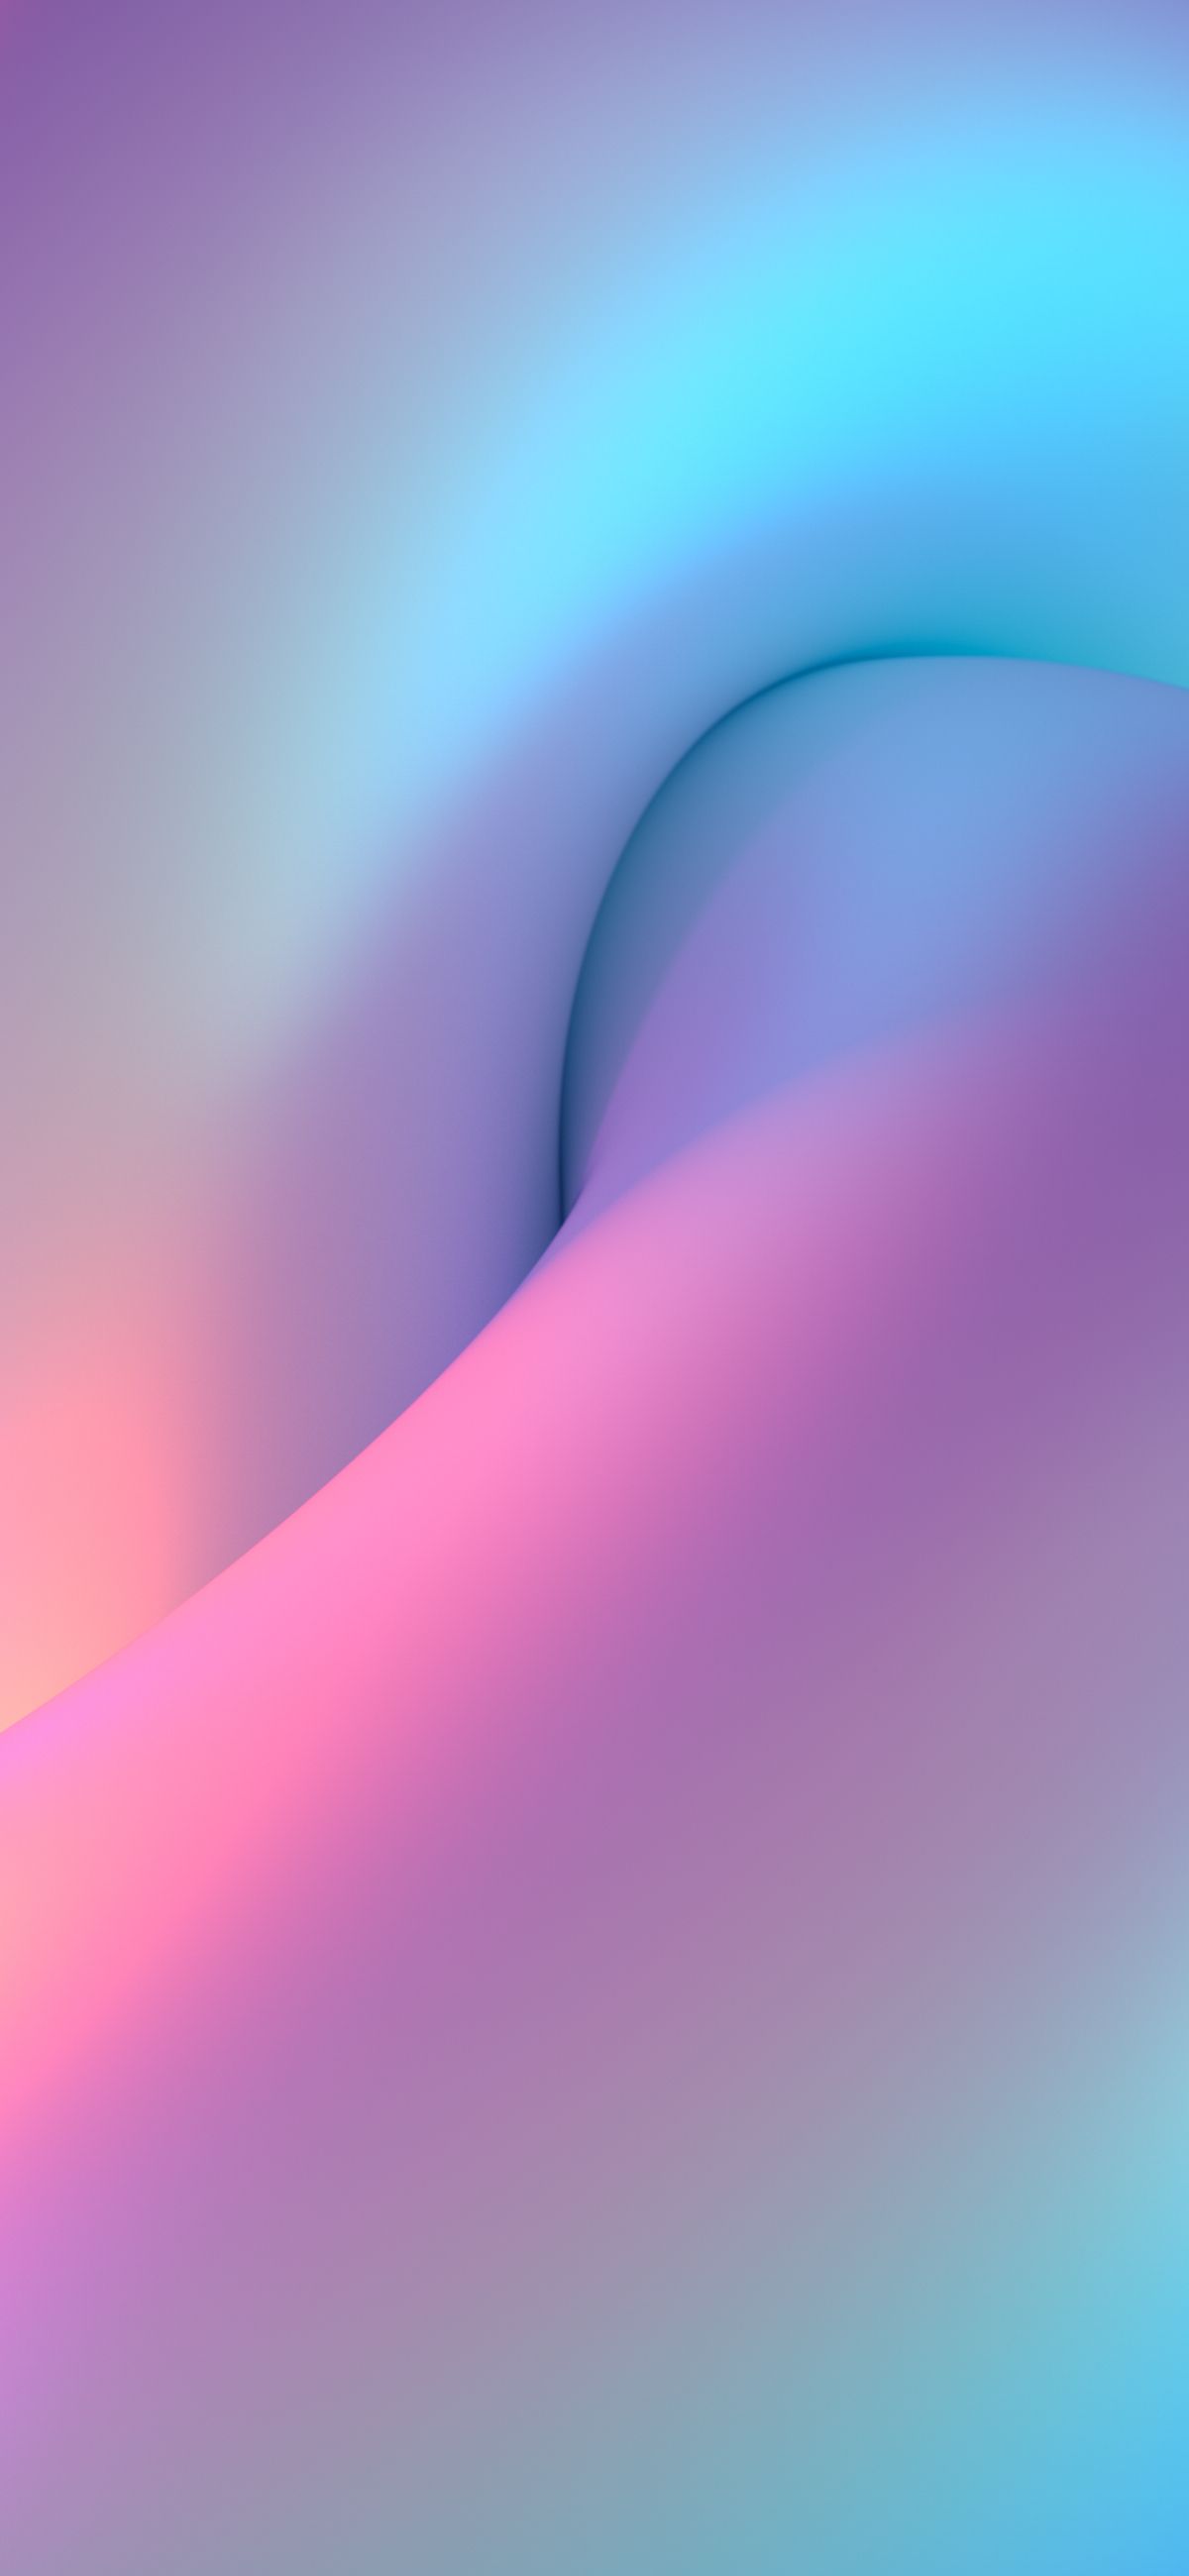 Abstract iPhone Wallpapers Created by Facebook's Design Team